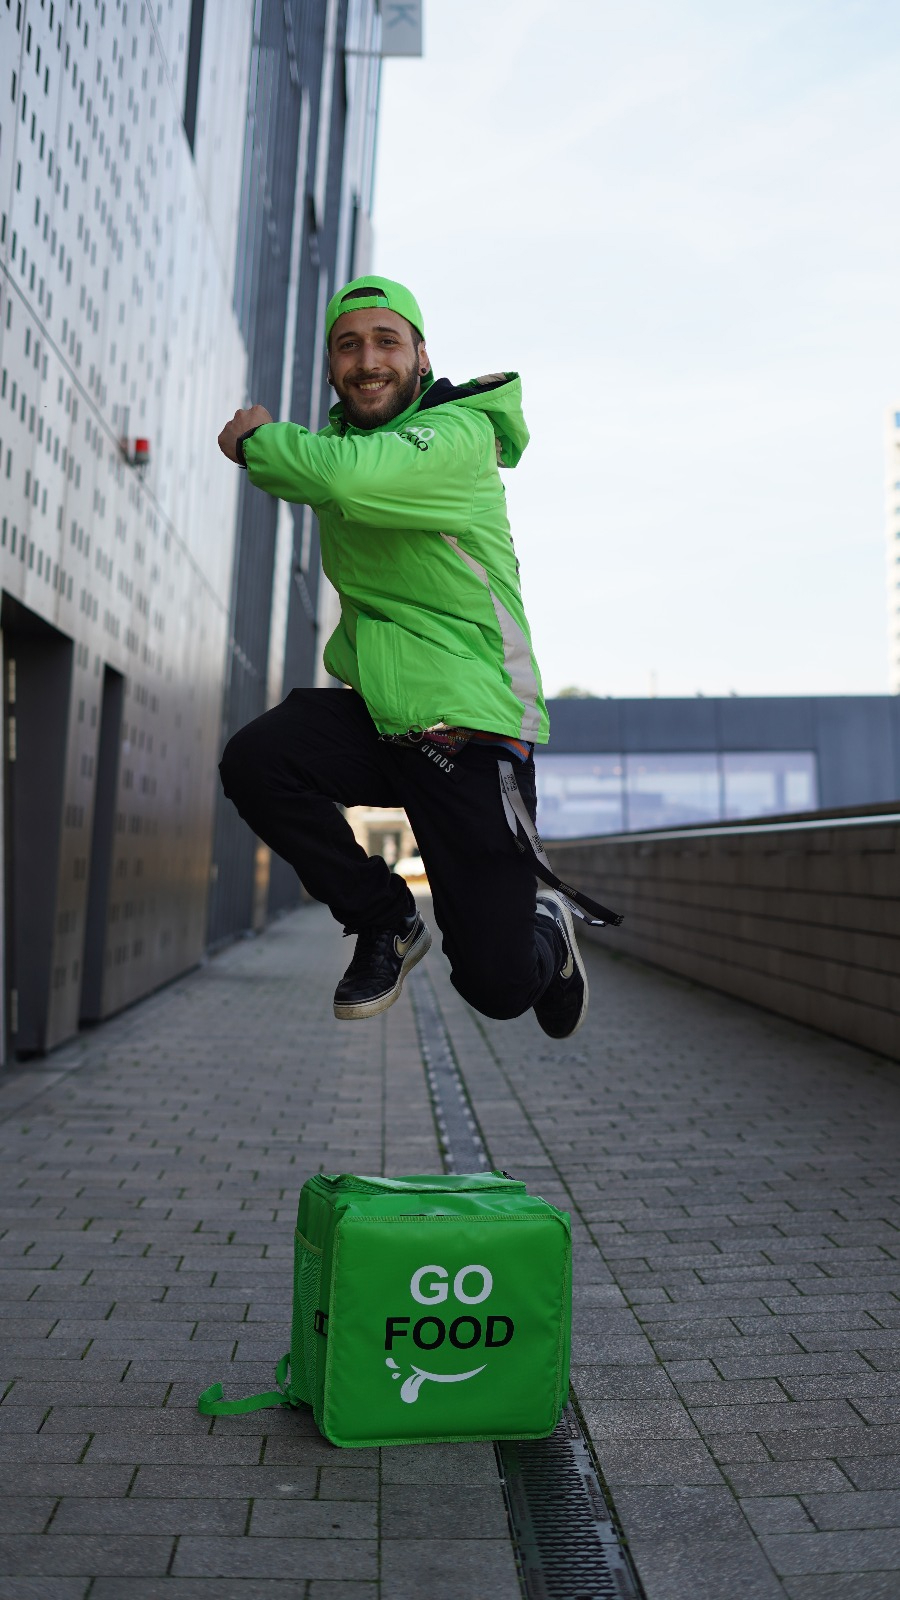 Energetic GO FOOD delivery person captured mid-jump, showcasing the active lifestyle of urban food delivery services.